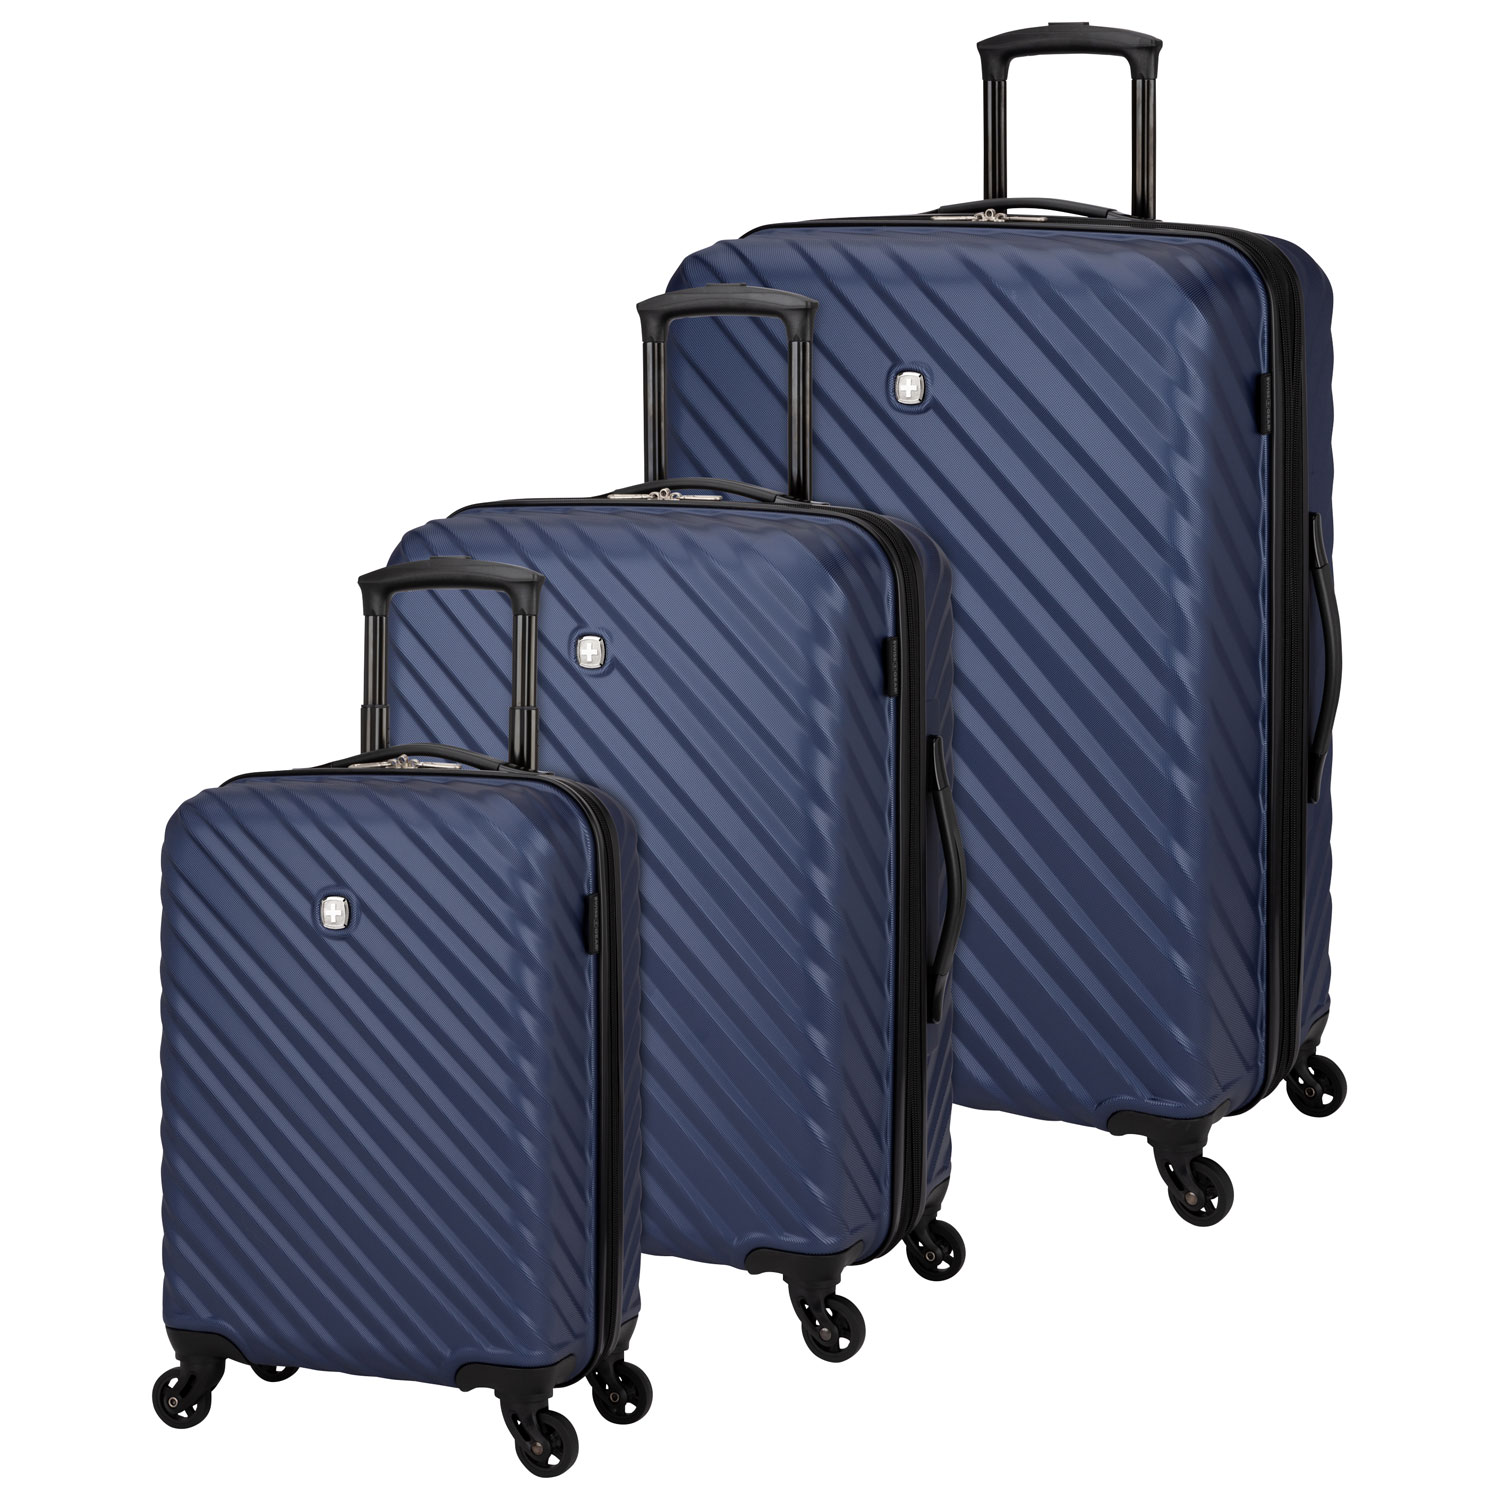 Luggage, Suitcases u0026 Travel Bags | Best Buy Canada